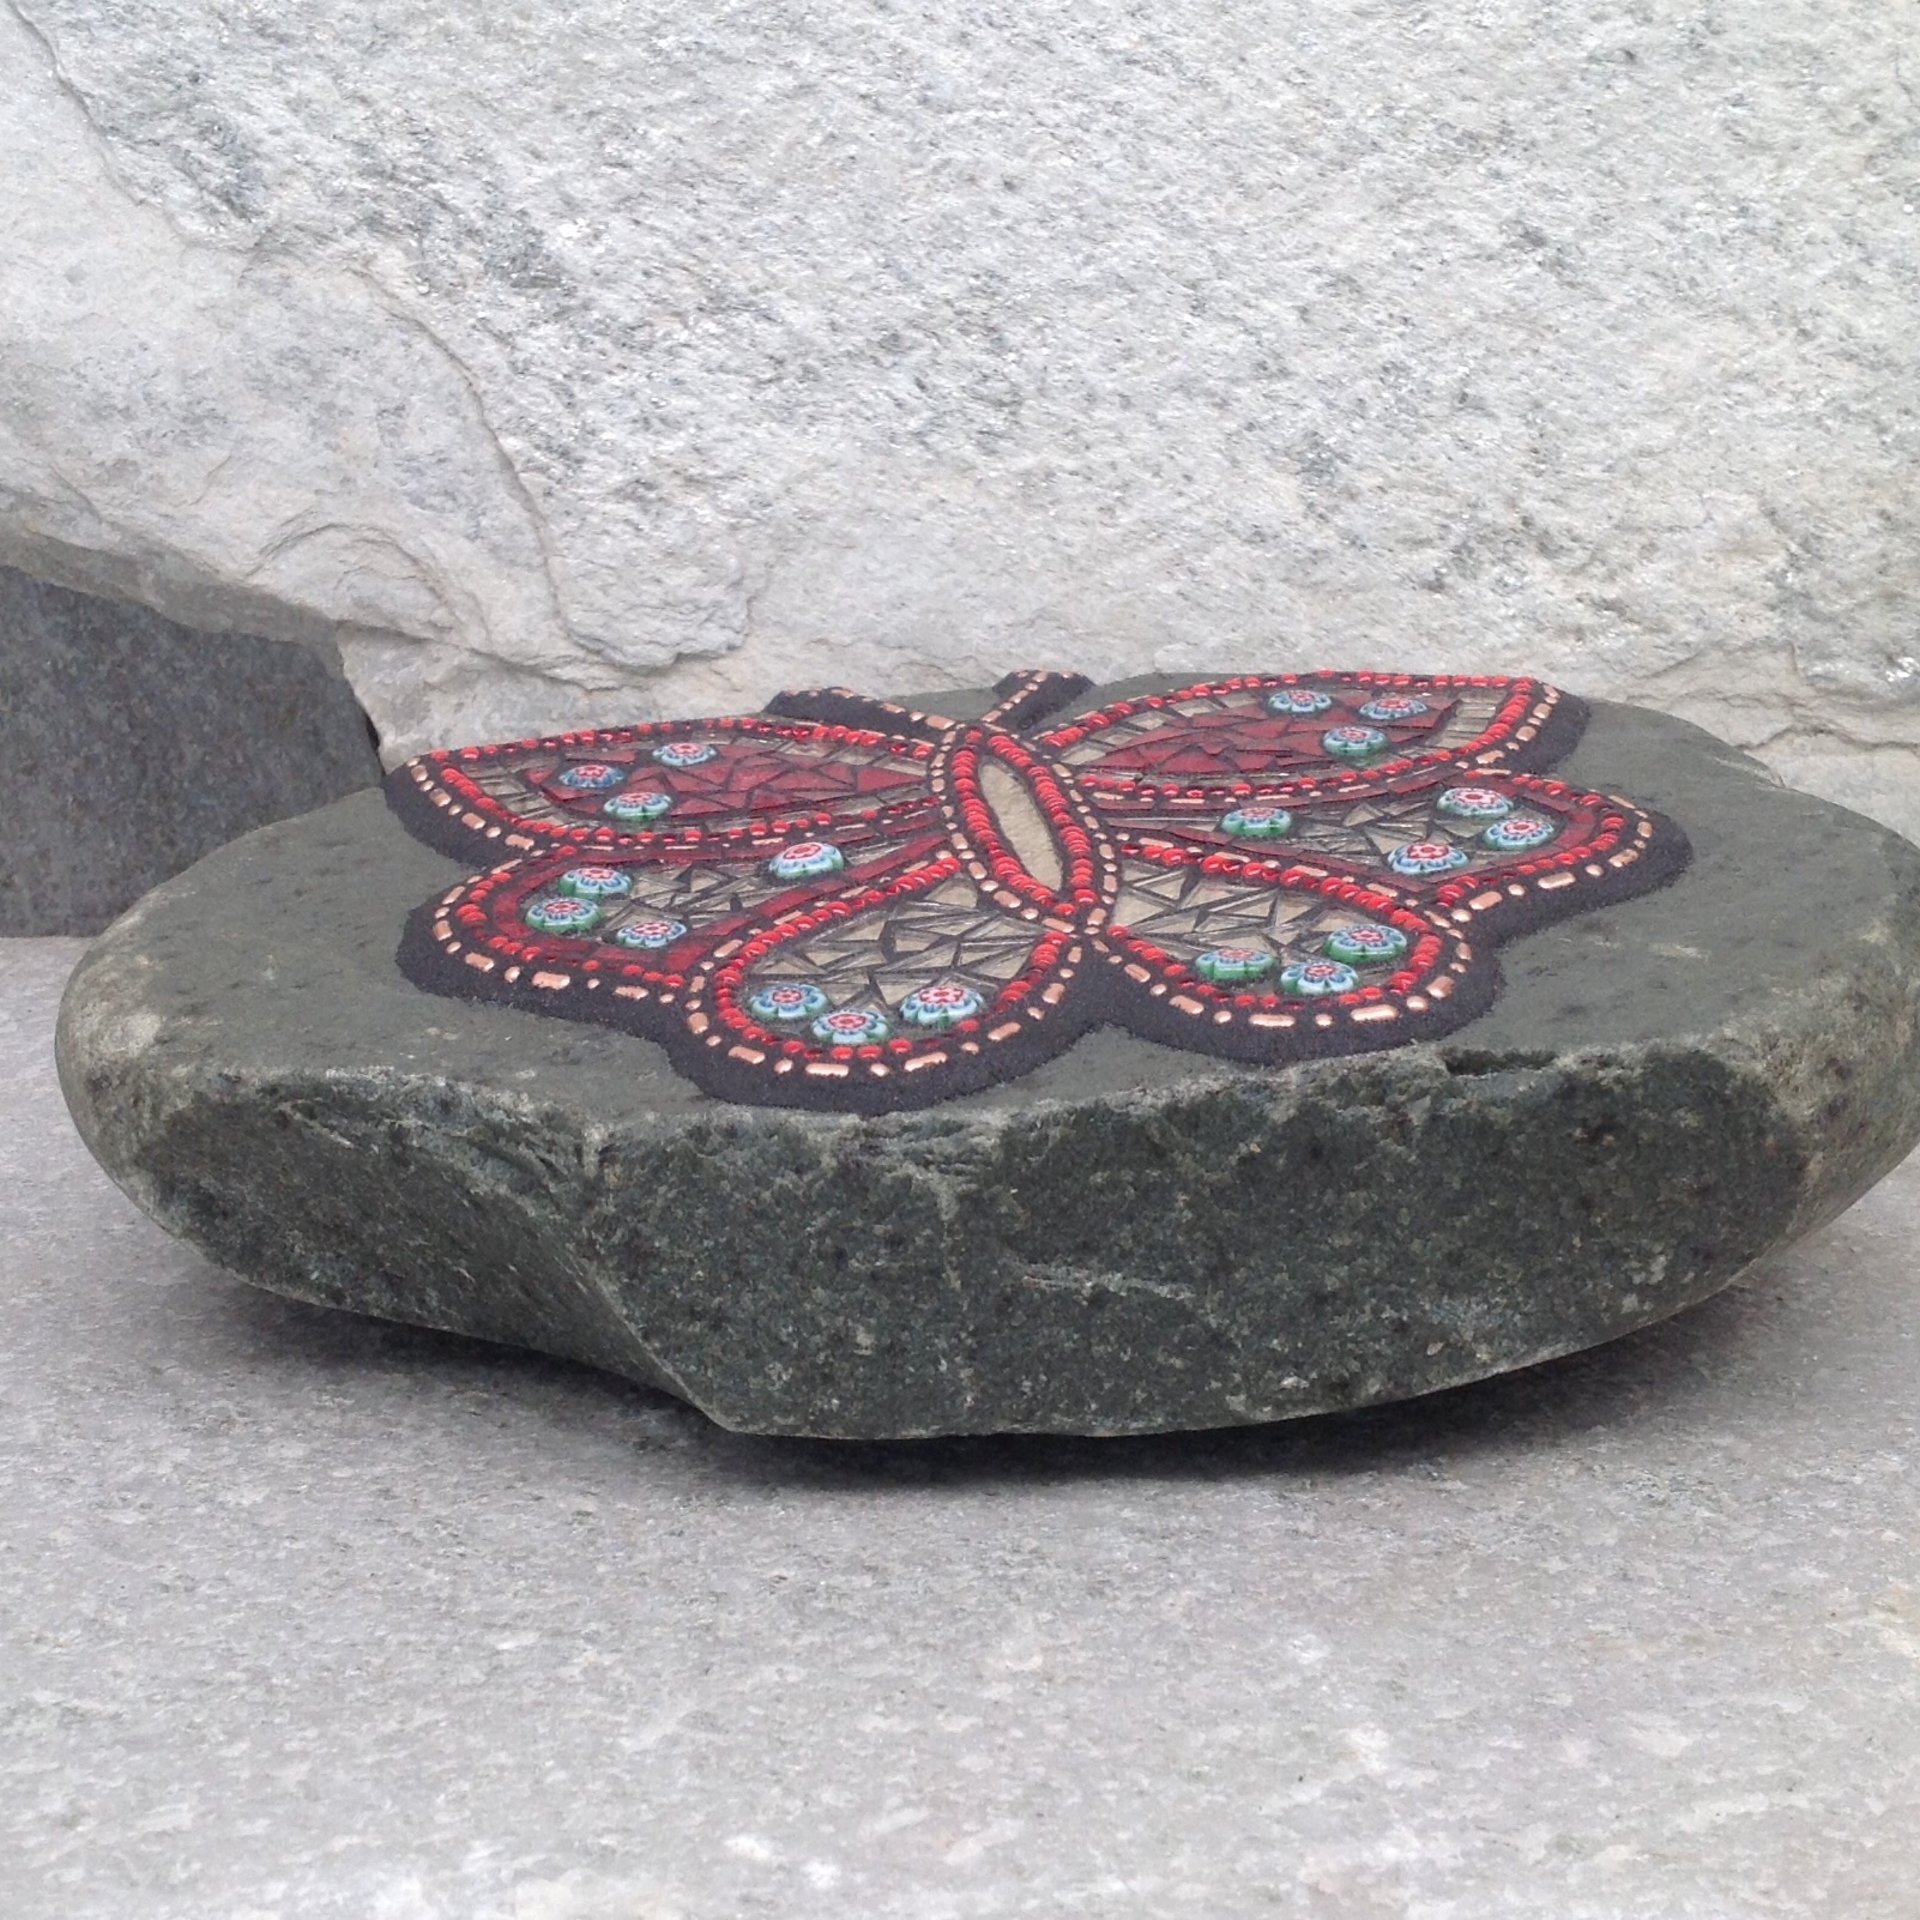 Copper, Red and Bronze Mirror Butterfly Mosaic -Garden Stone